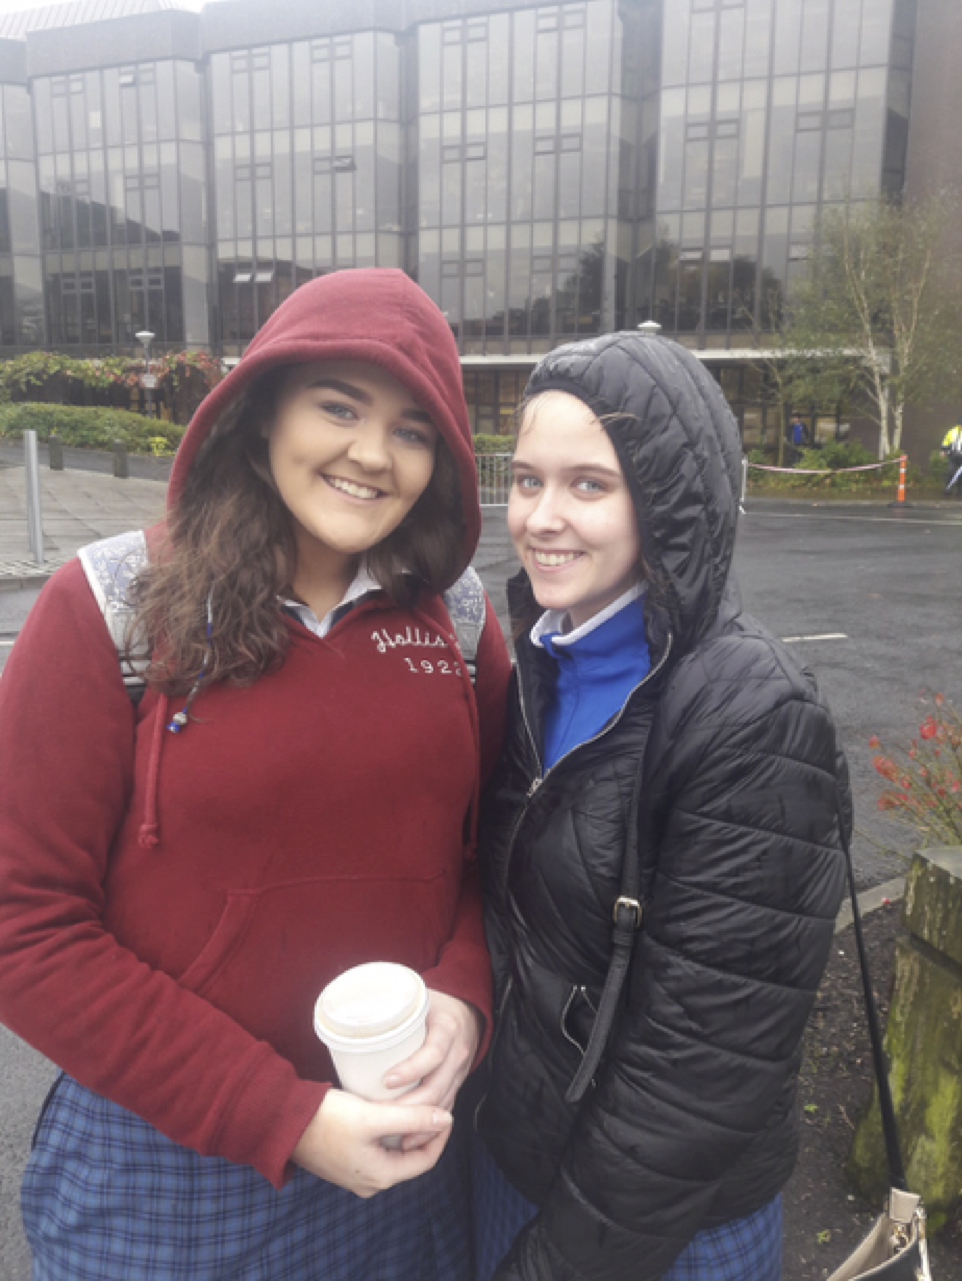 Oct 2017: Desmond College Students travel to the college open days in UL, LIT and Mary Immaculate